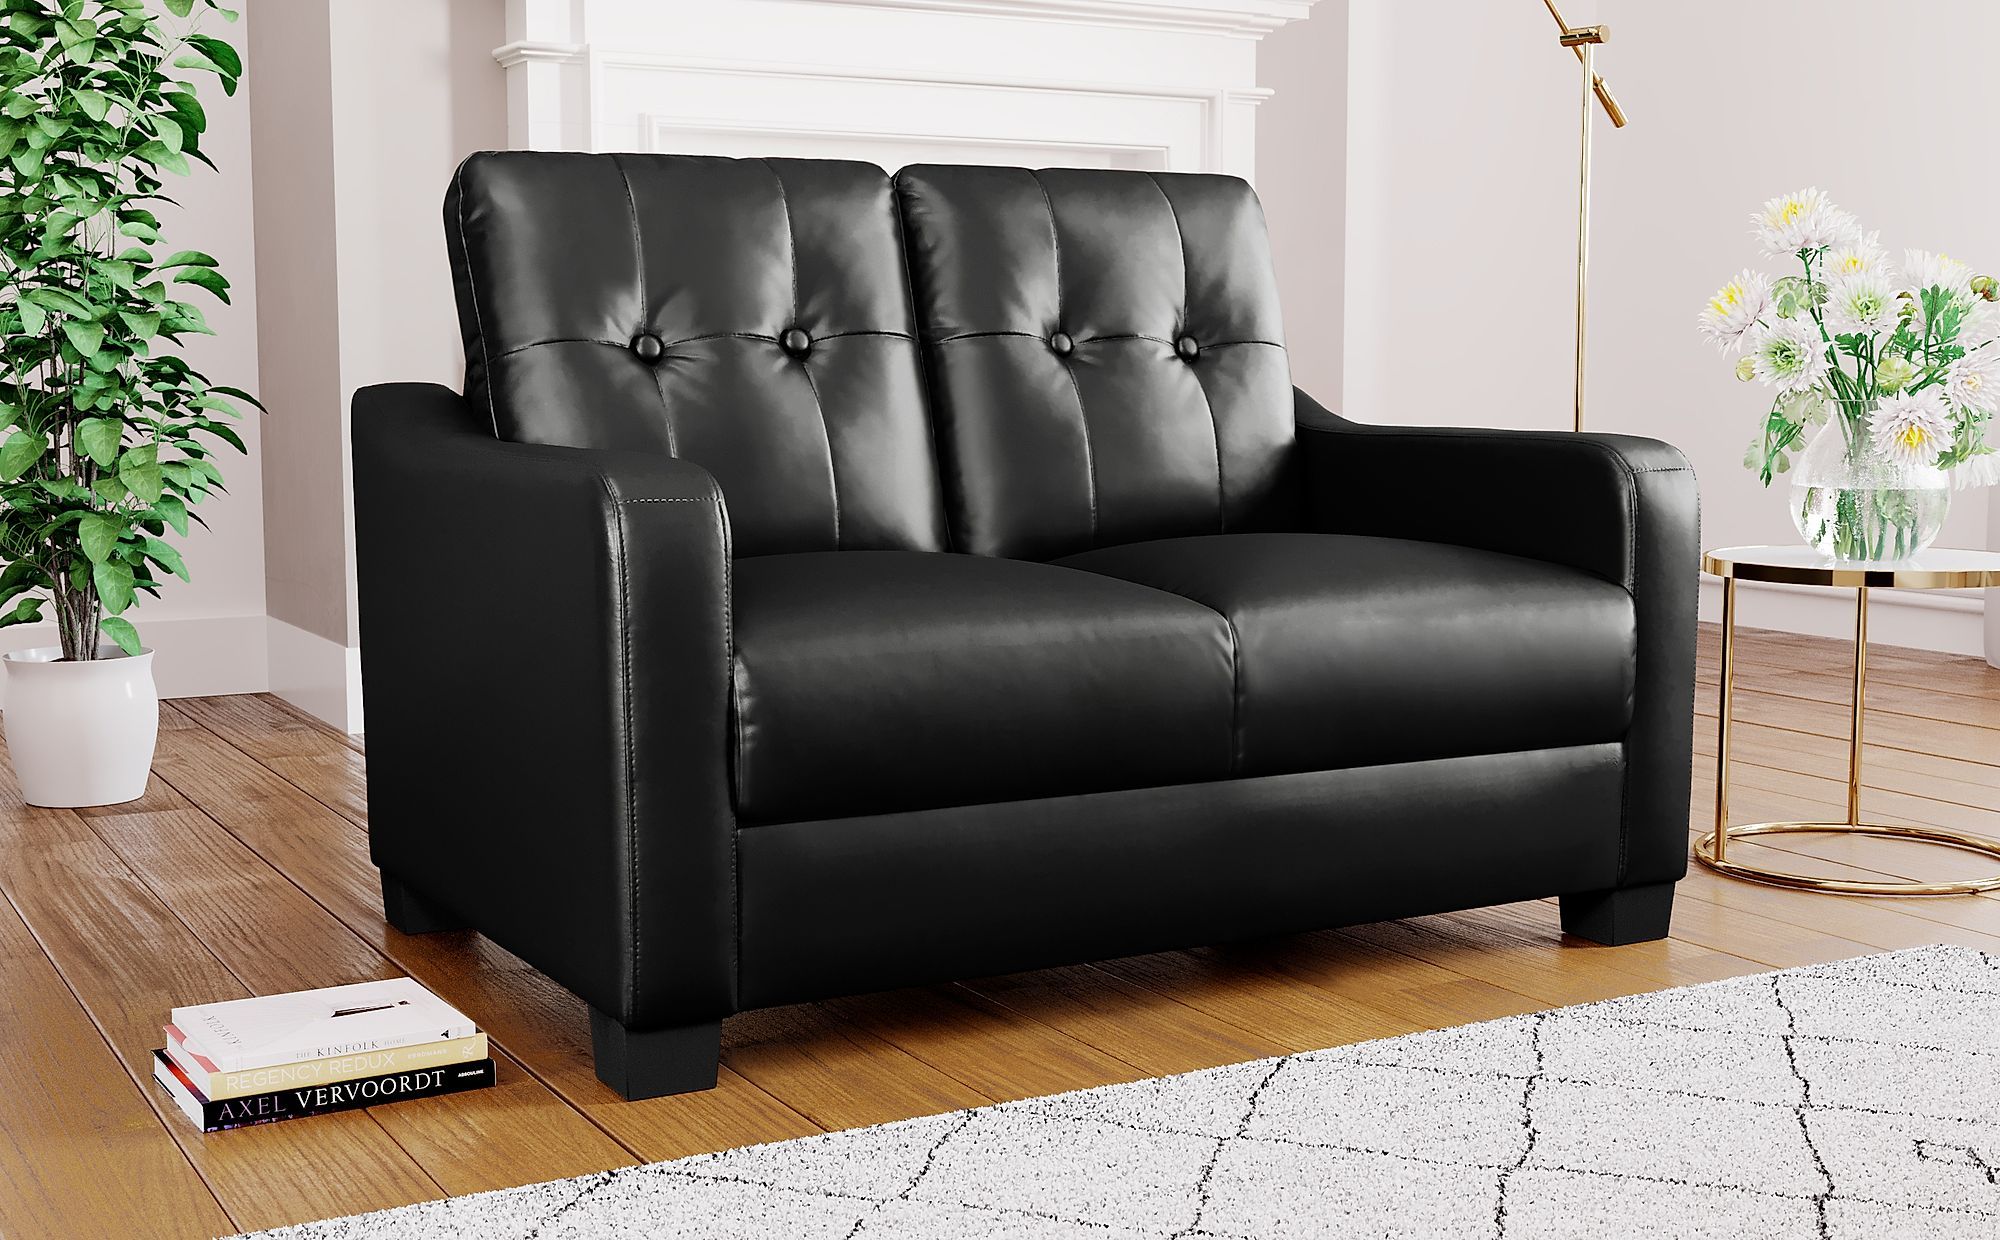 Belmont Black Leather 2 Seater Sofa | Furniture Choice Throughout Black Velvet 2 Seater Sofa Beds (Gallery 8 of 20)